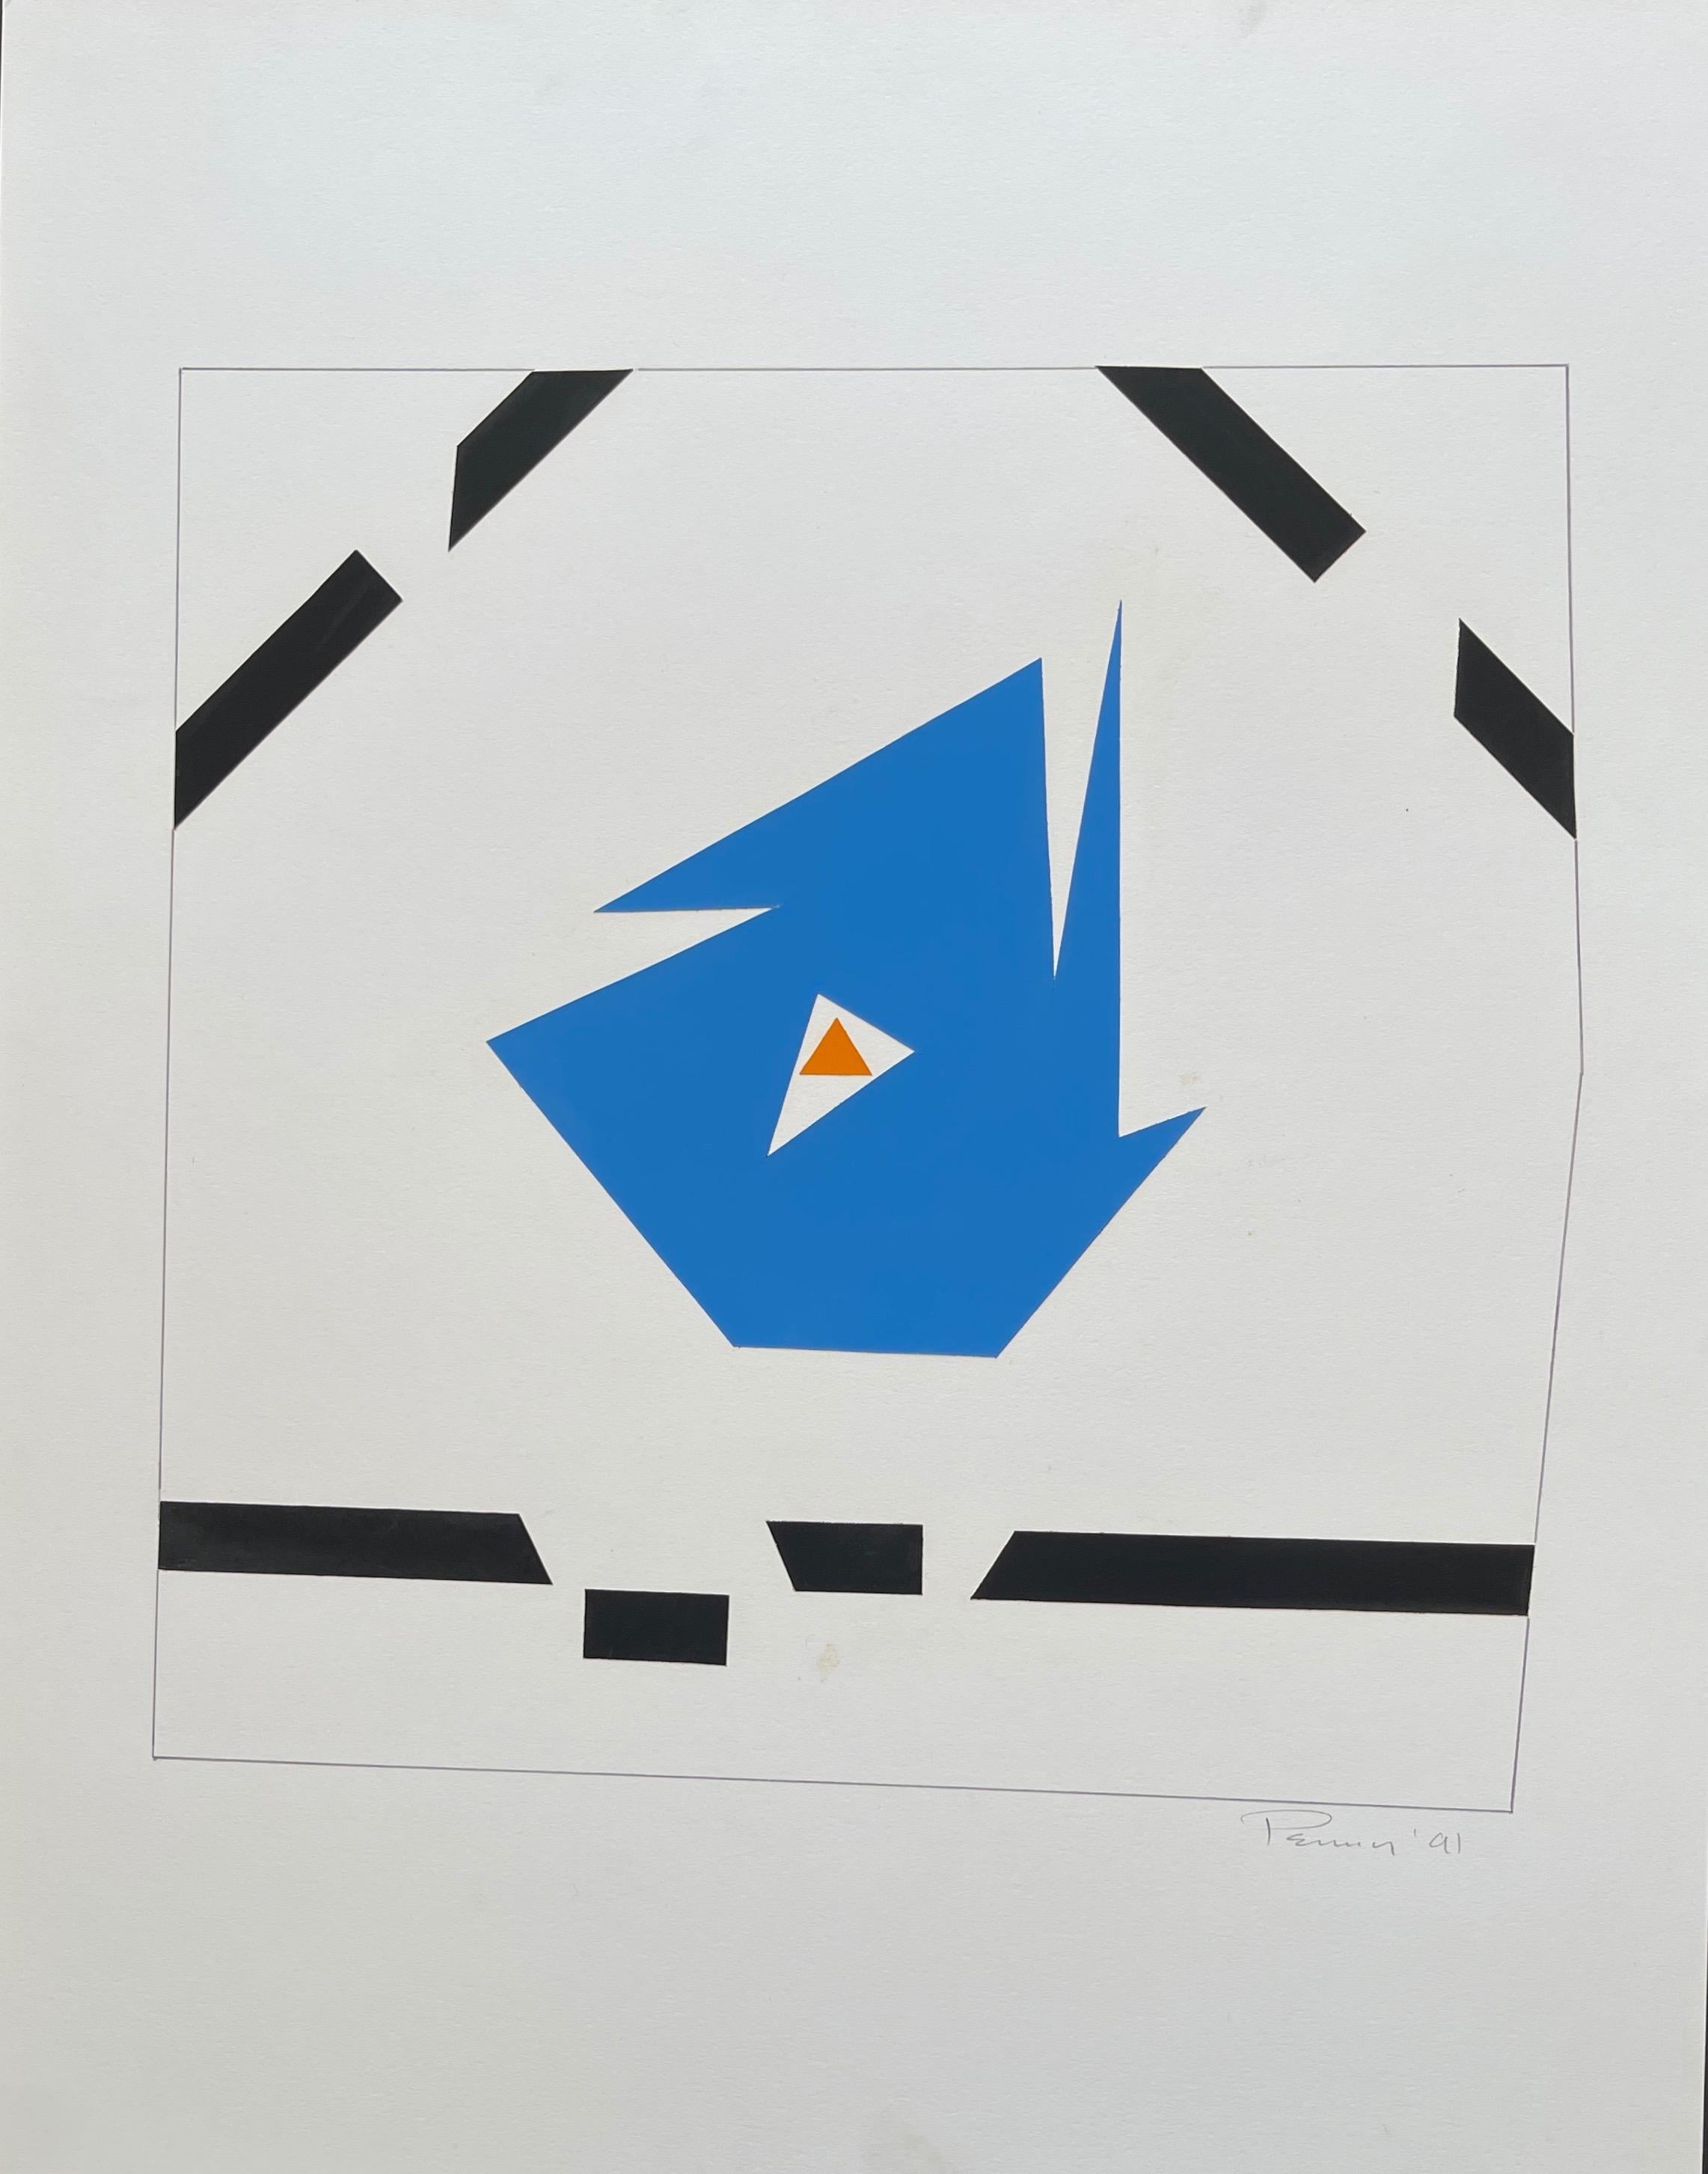 Aubrey Penny Original Hard Edge Collage 
Signed and Dated 
Amor Abundans Series, Amor Stabilis, 1-6215, Jan 1991

Aubrey Penny (American 1917-2000) was an innovative California abstract artist who worked in a variety of mediums. Owner of the No-os